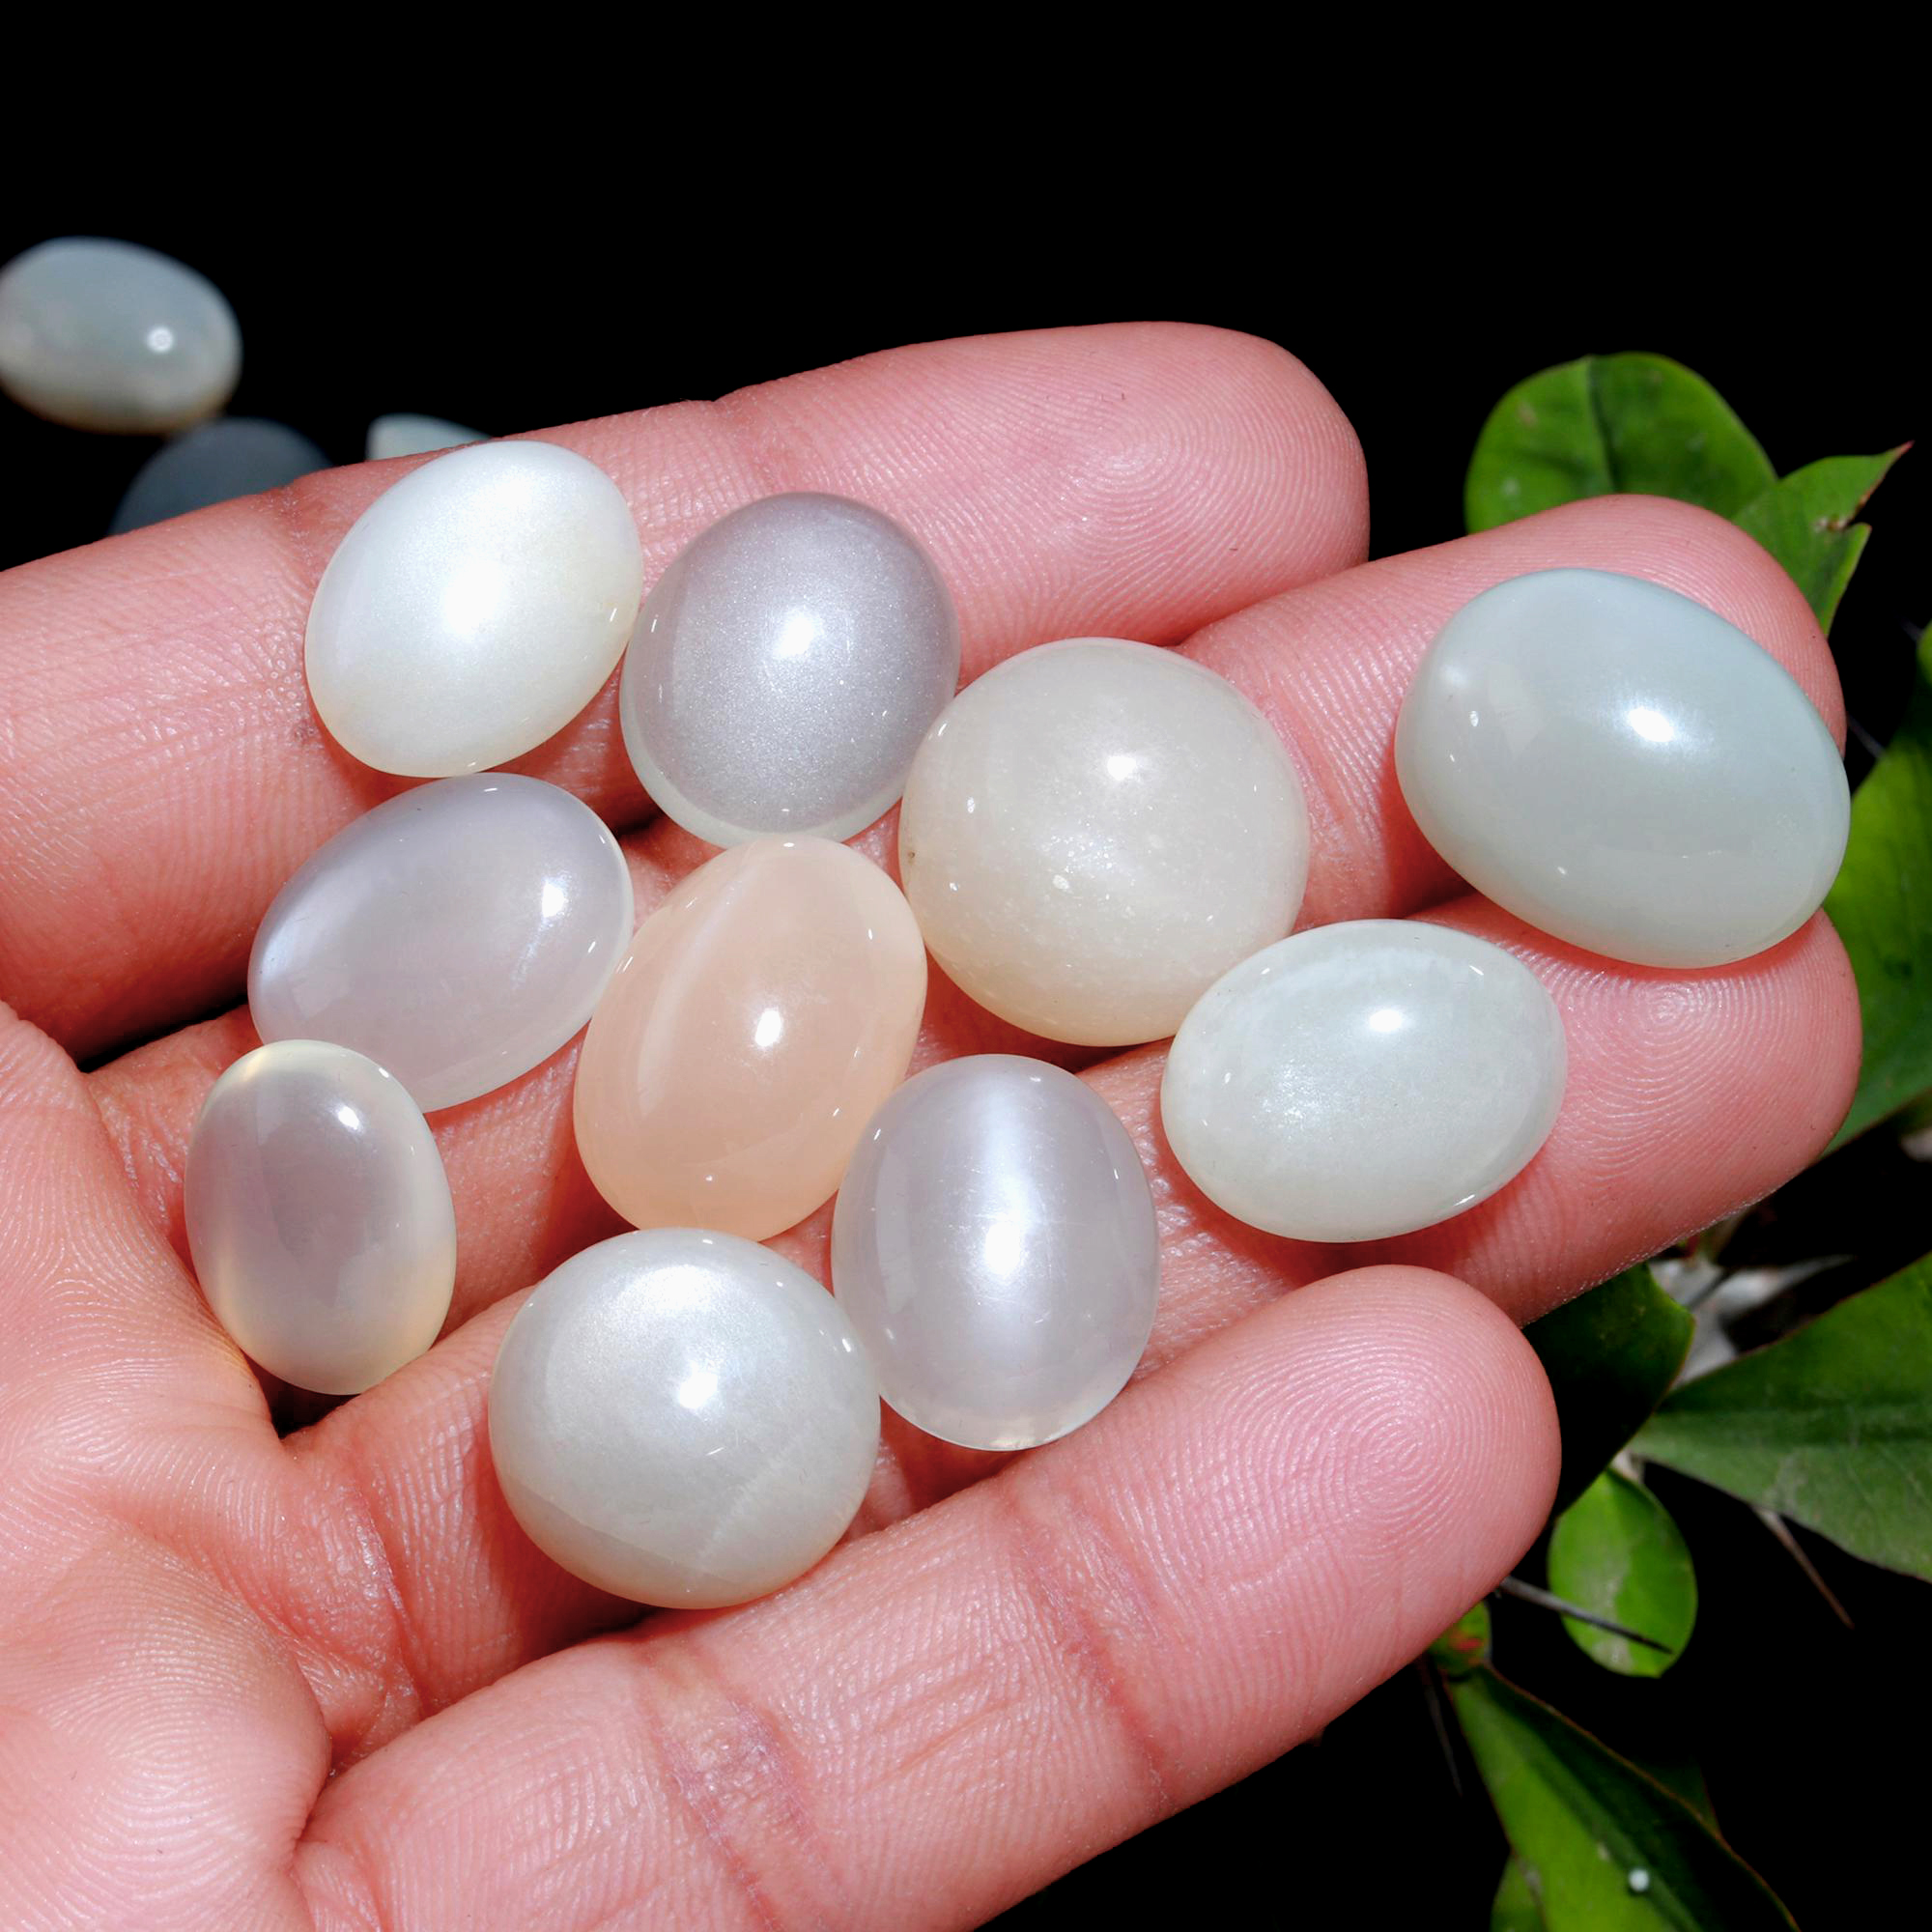 20 Pcs. 222Cts. Natural Grey Rainbow Moonstone polished Mix Cabochon Wholesale Loose Lot Size 22x18 16x12mm Gemstone for jewelry#1146